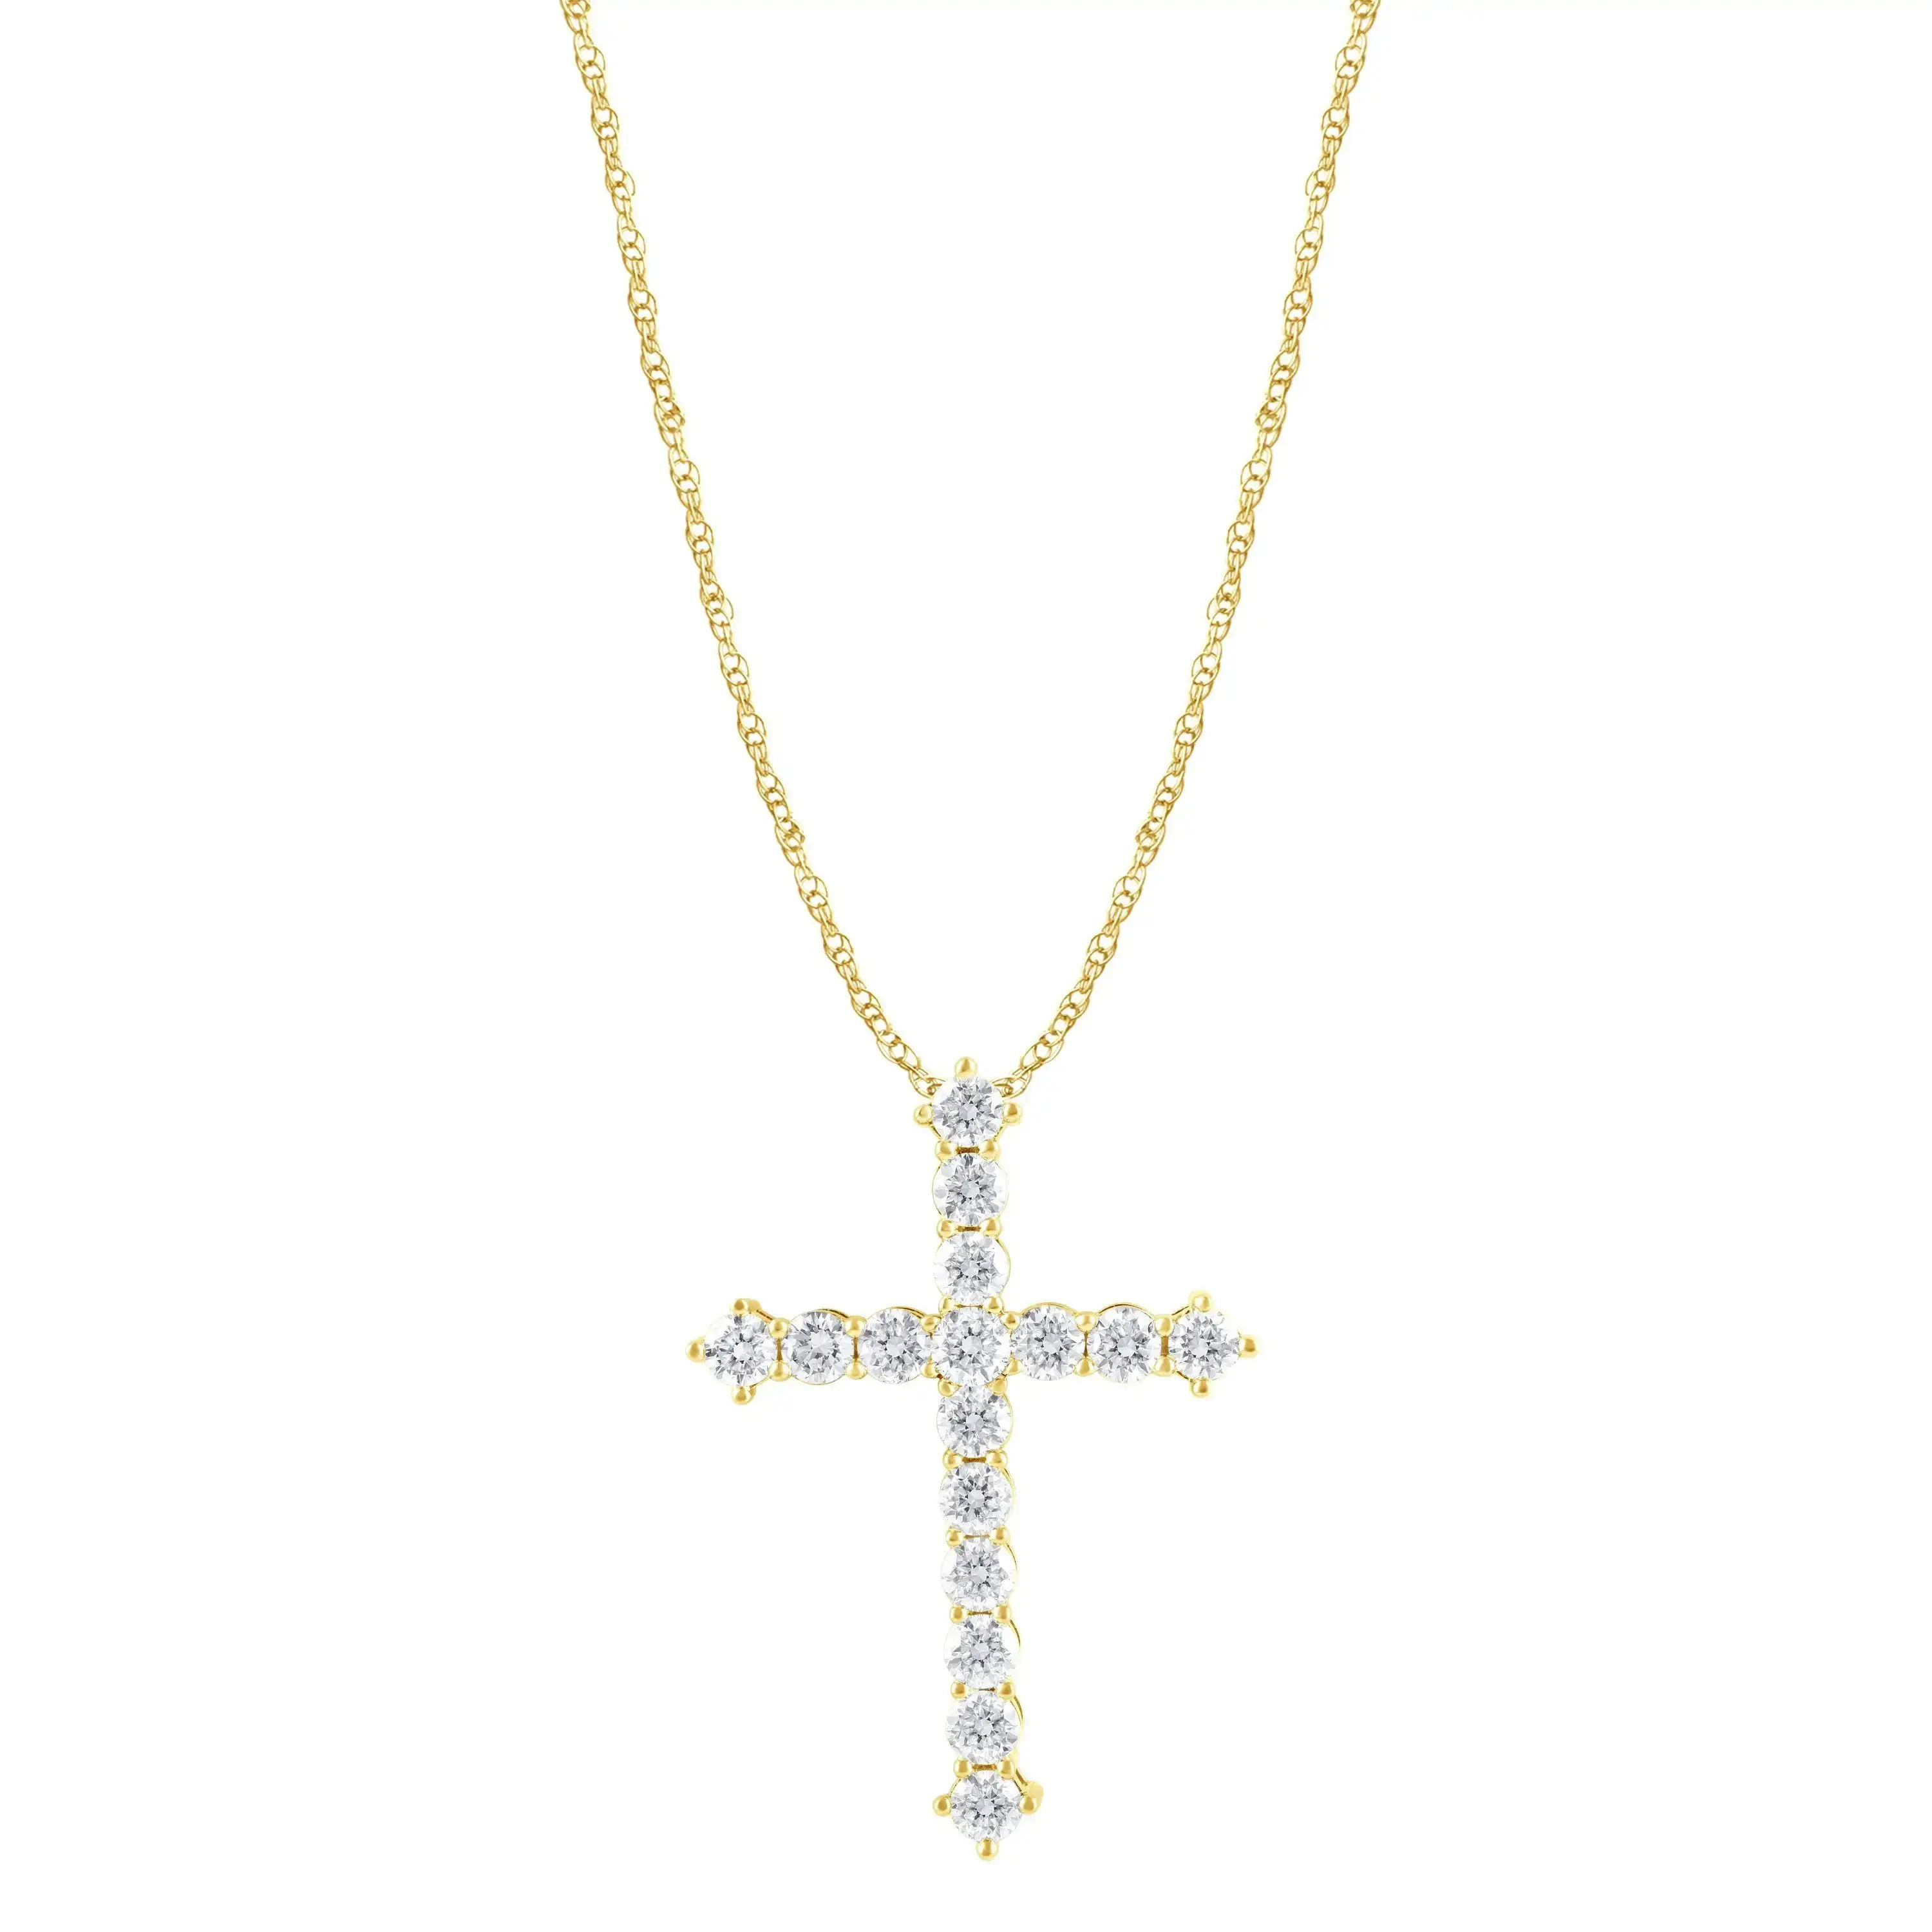 Meera Cross Necklace with 1.00ct of Laboratory Grown Diamonds in 9ct Yellow Gold